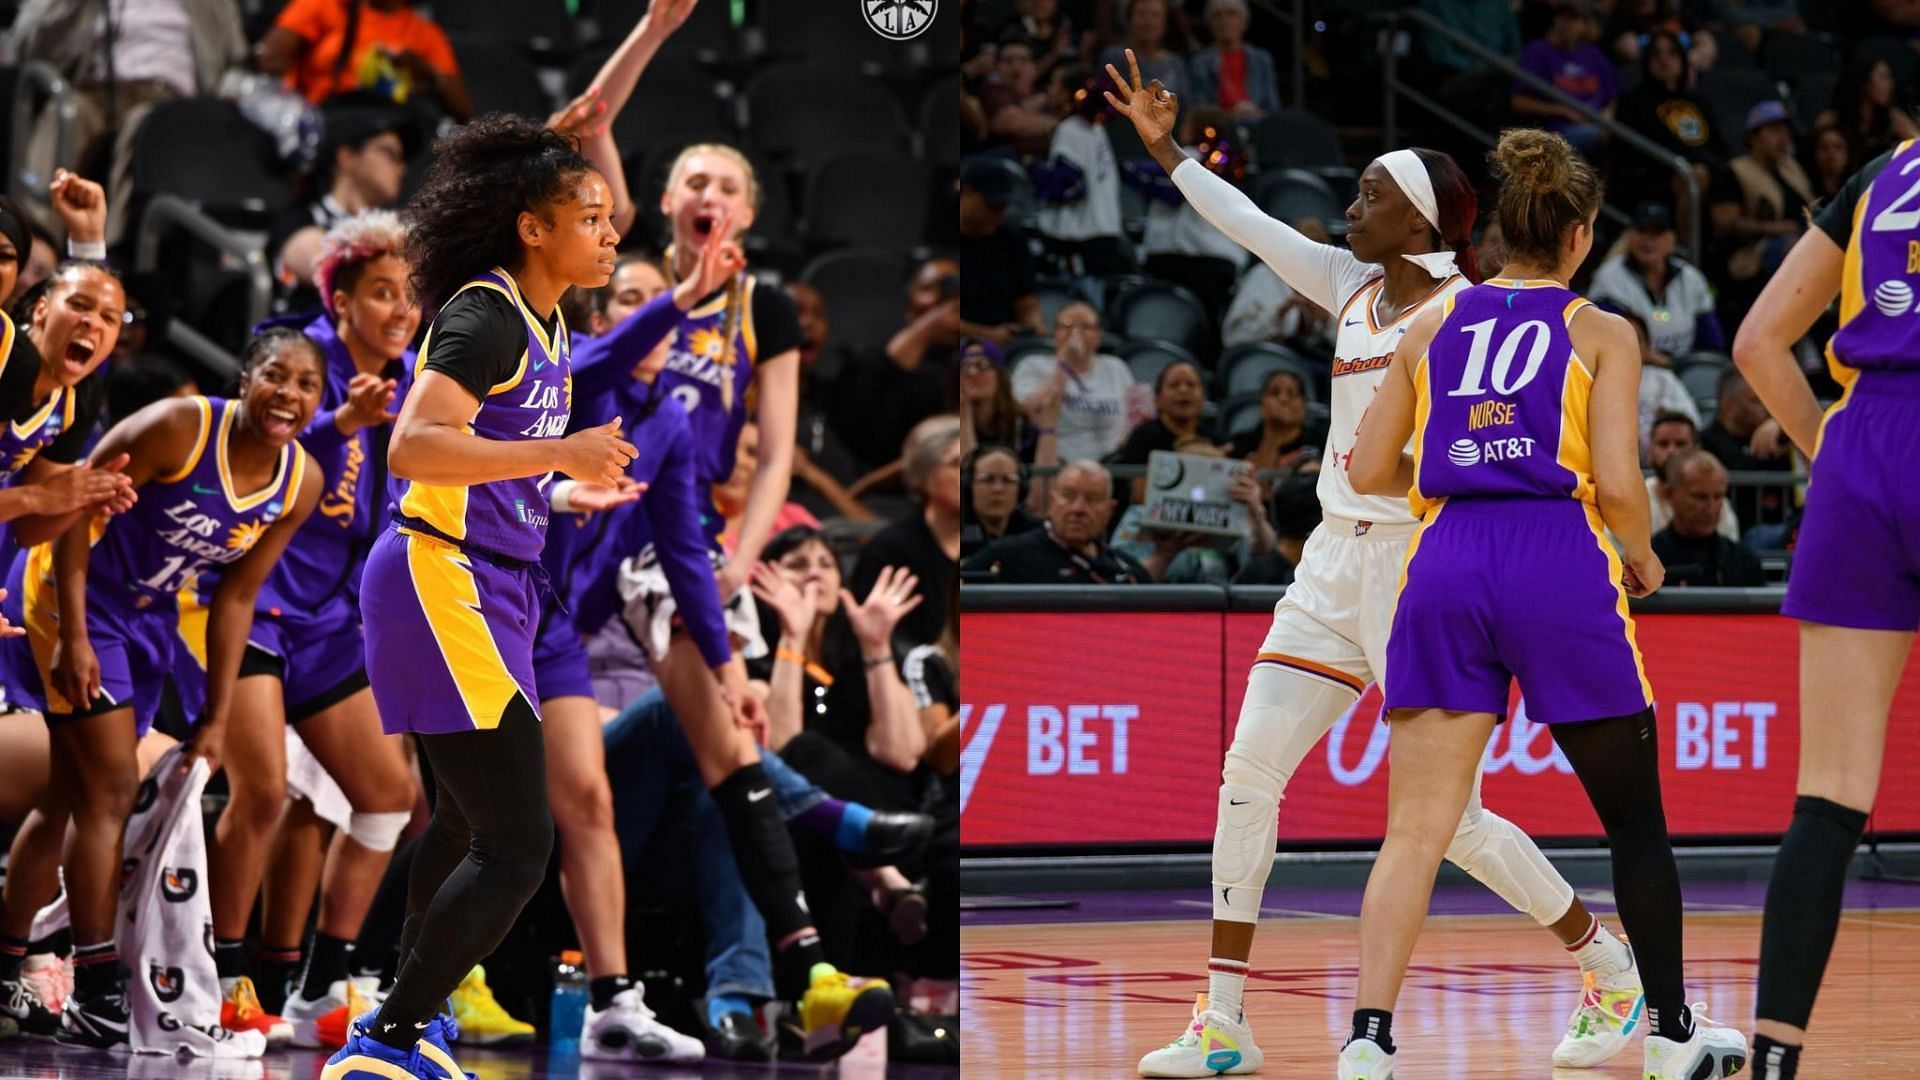 The LA Sparks beat the Phoenix Mercury in their second preseason game